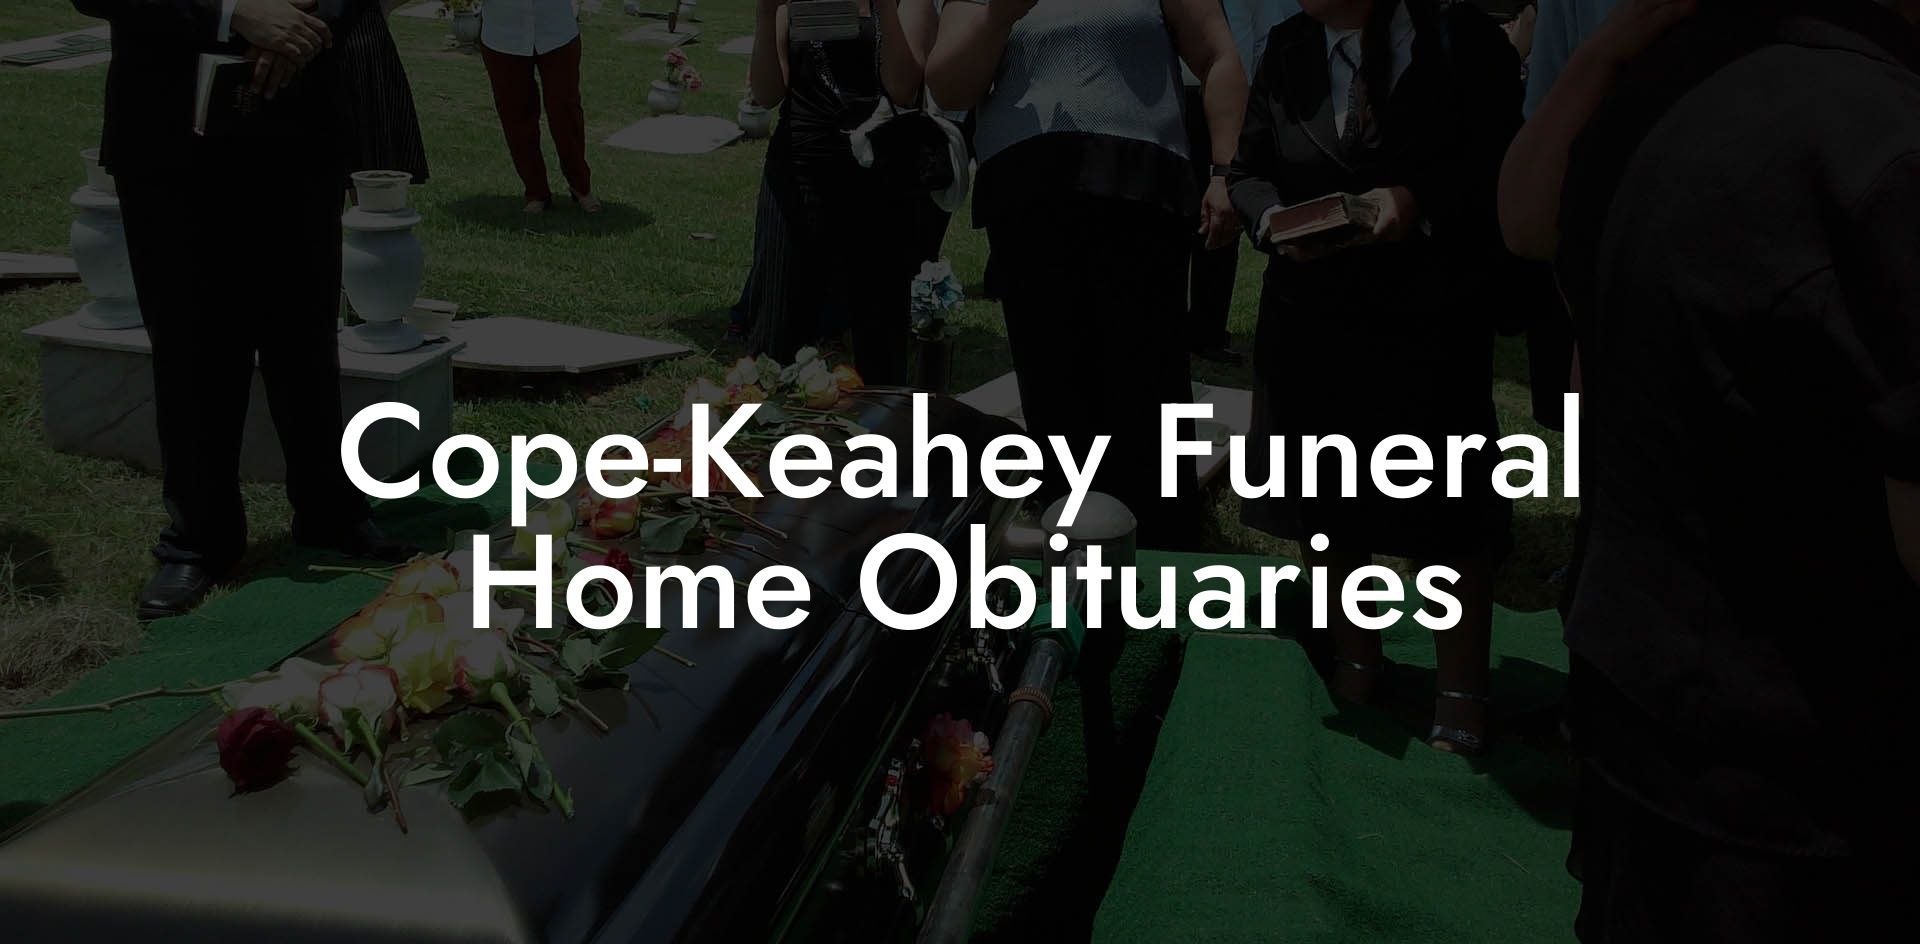 Cope-Keahey Funeral Home Obituaries